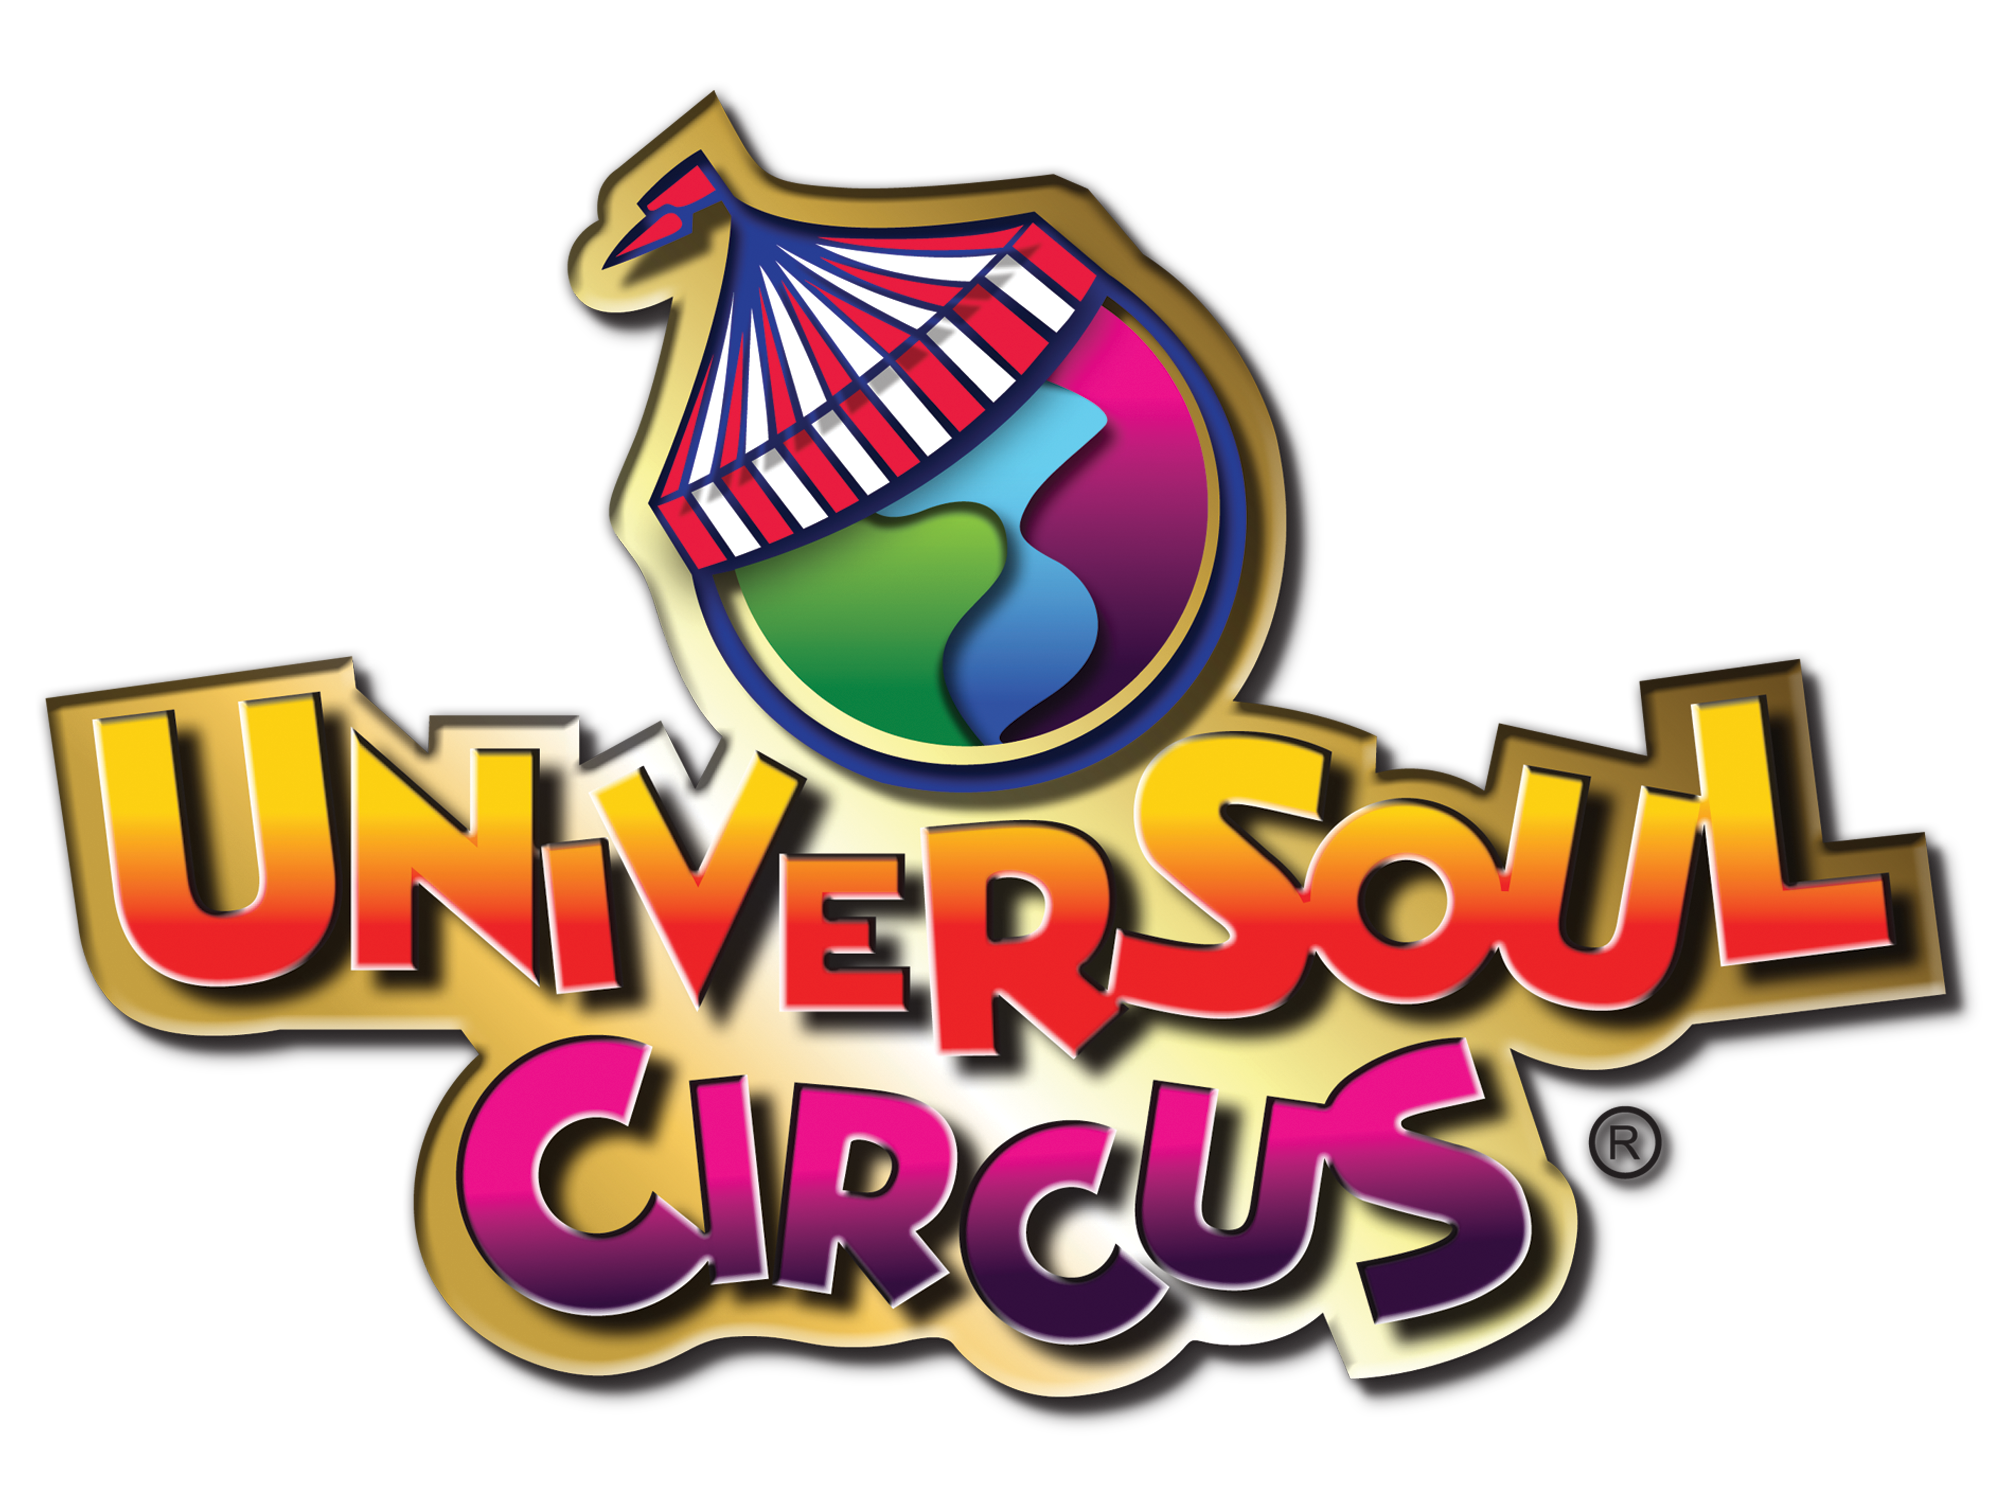 UniverSoul Circus surpasses expectations New York Amsterdam News The